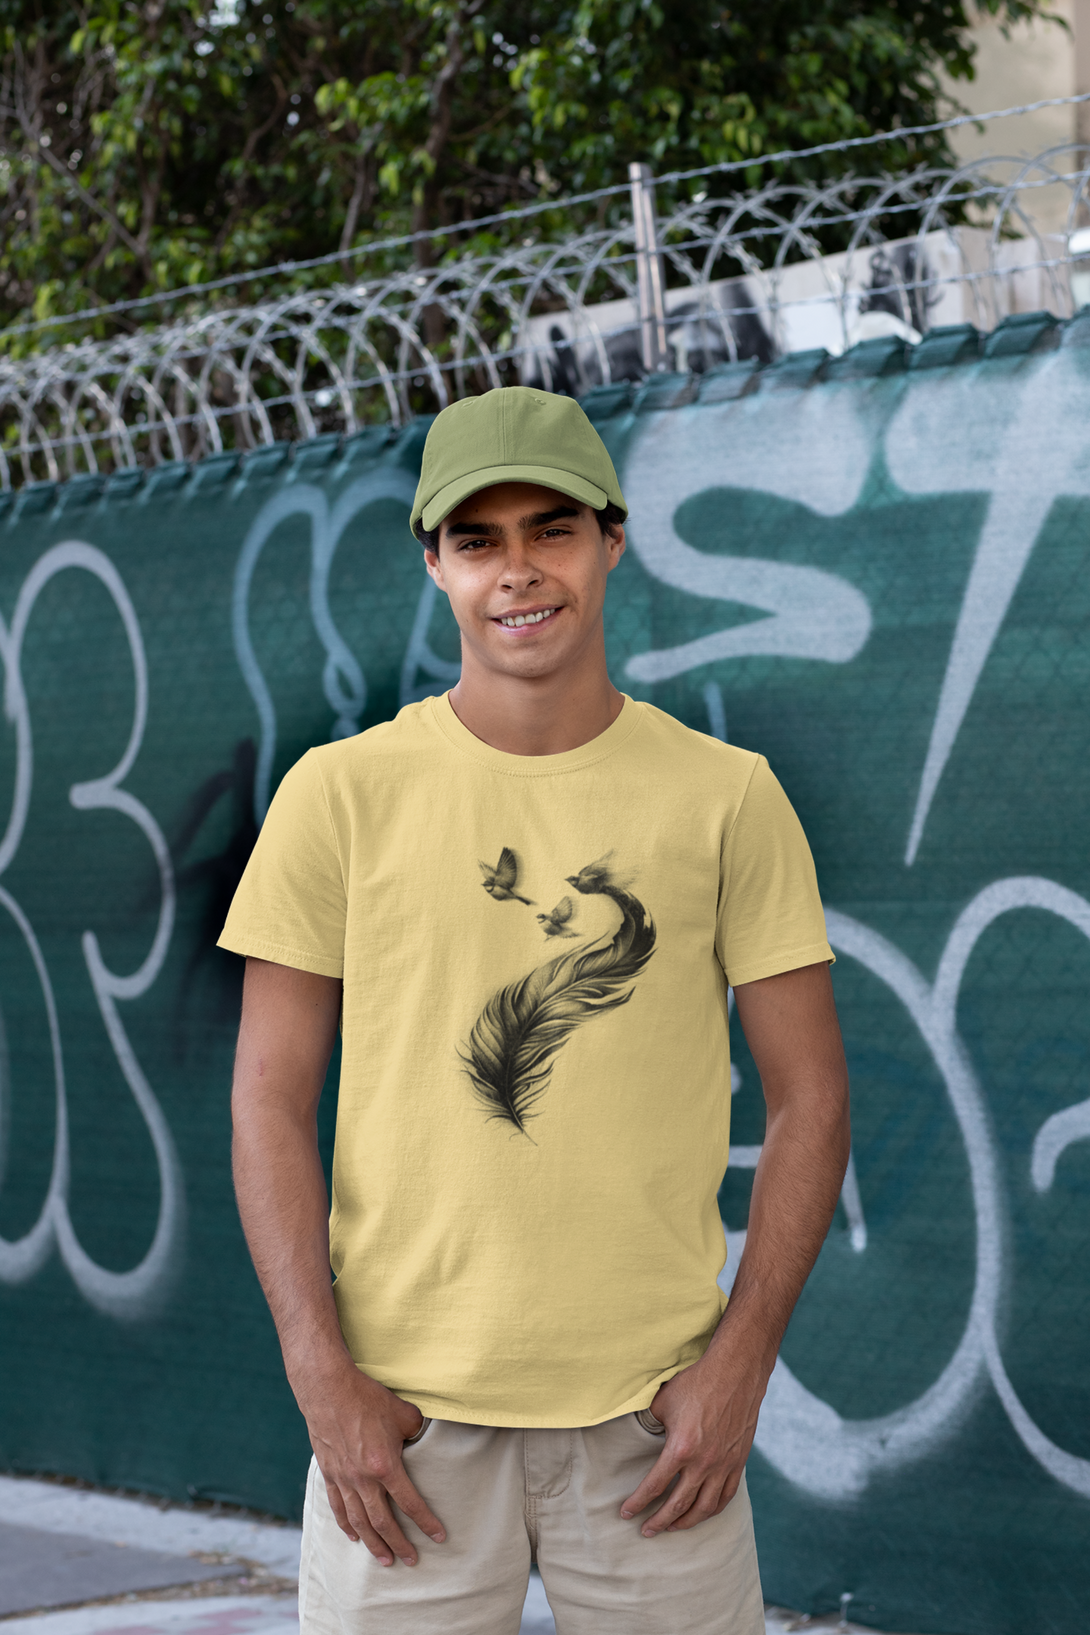 Feather With Birds Printed T-Shirt For Men - WowWaves - 6